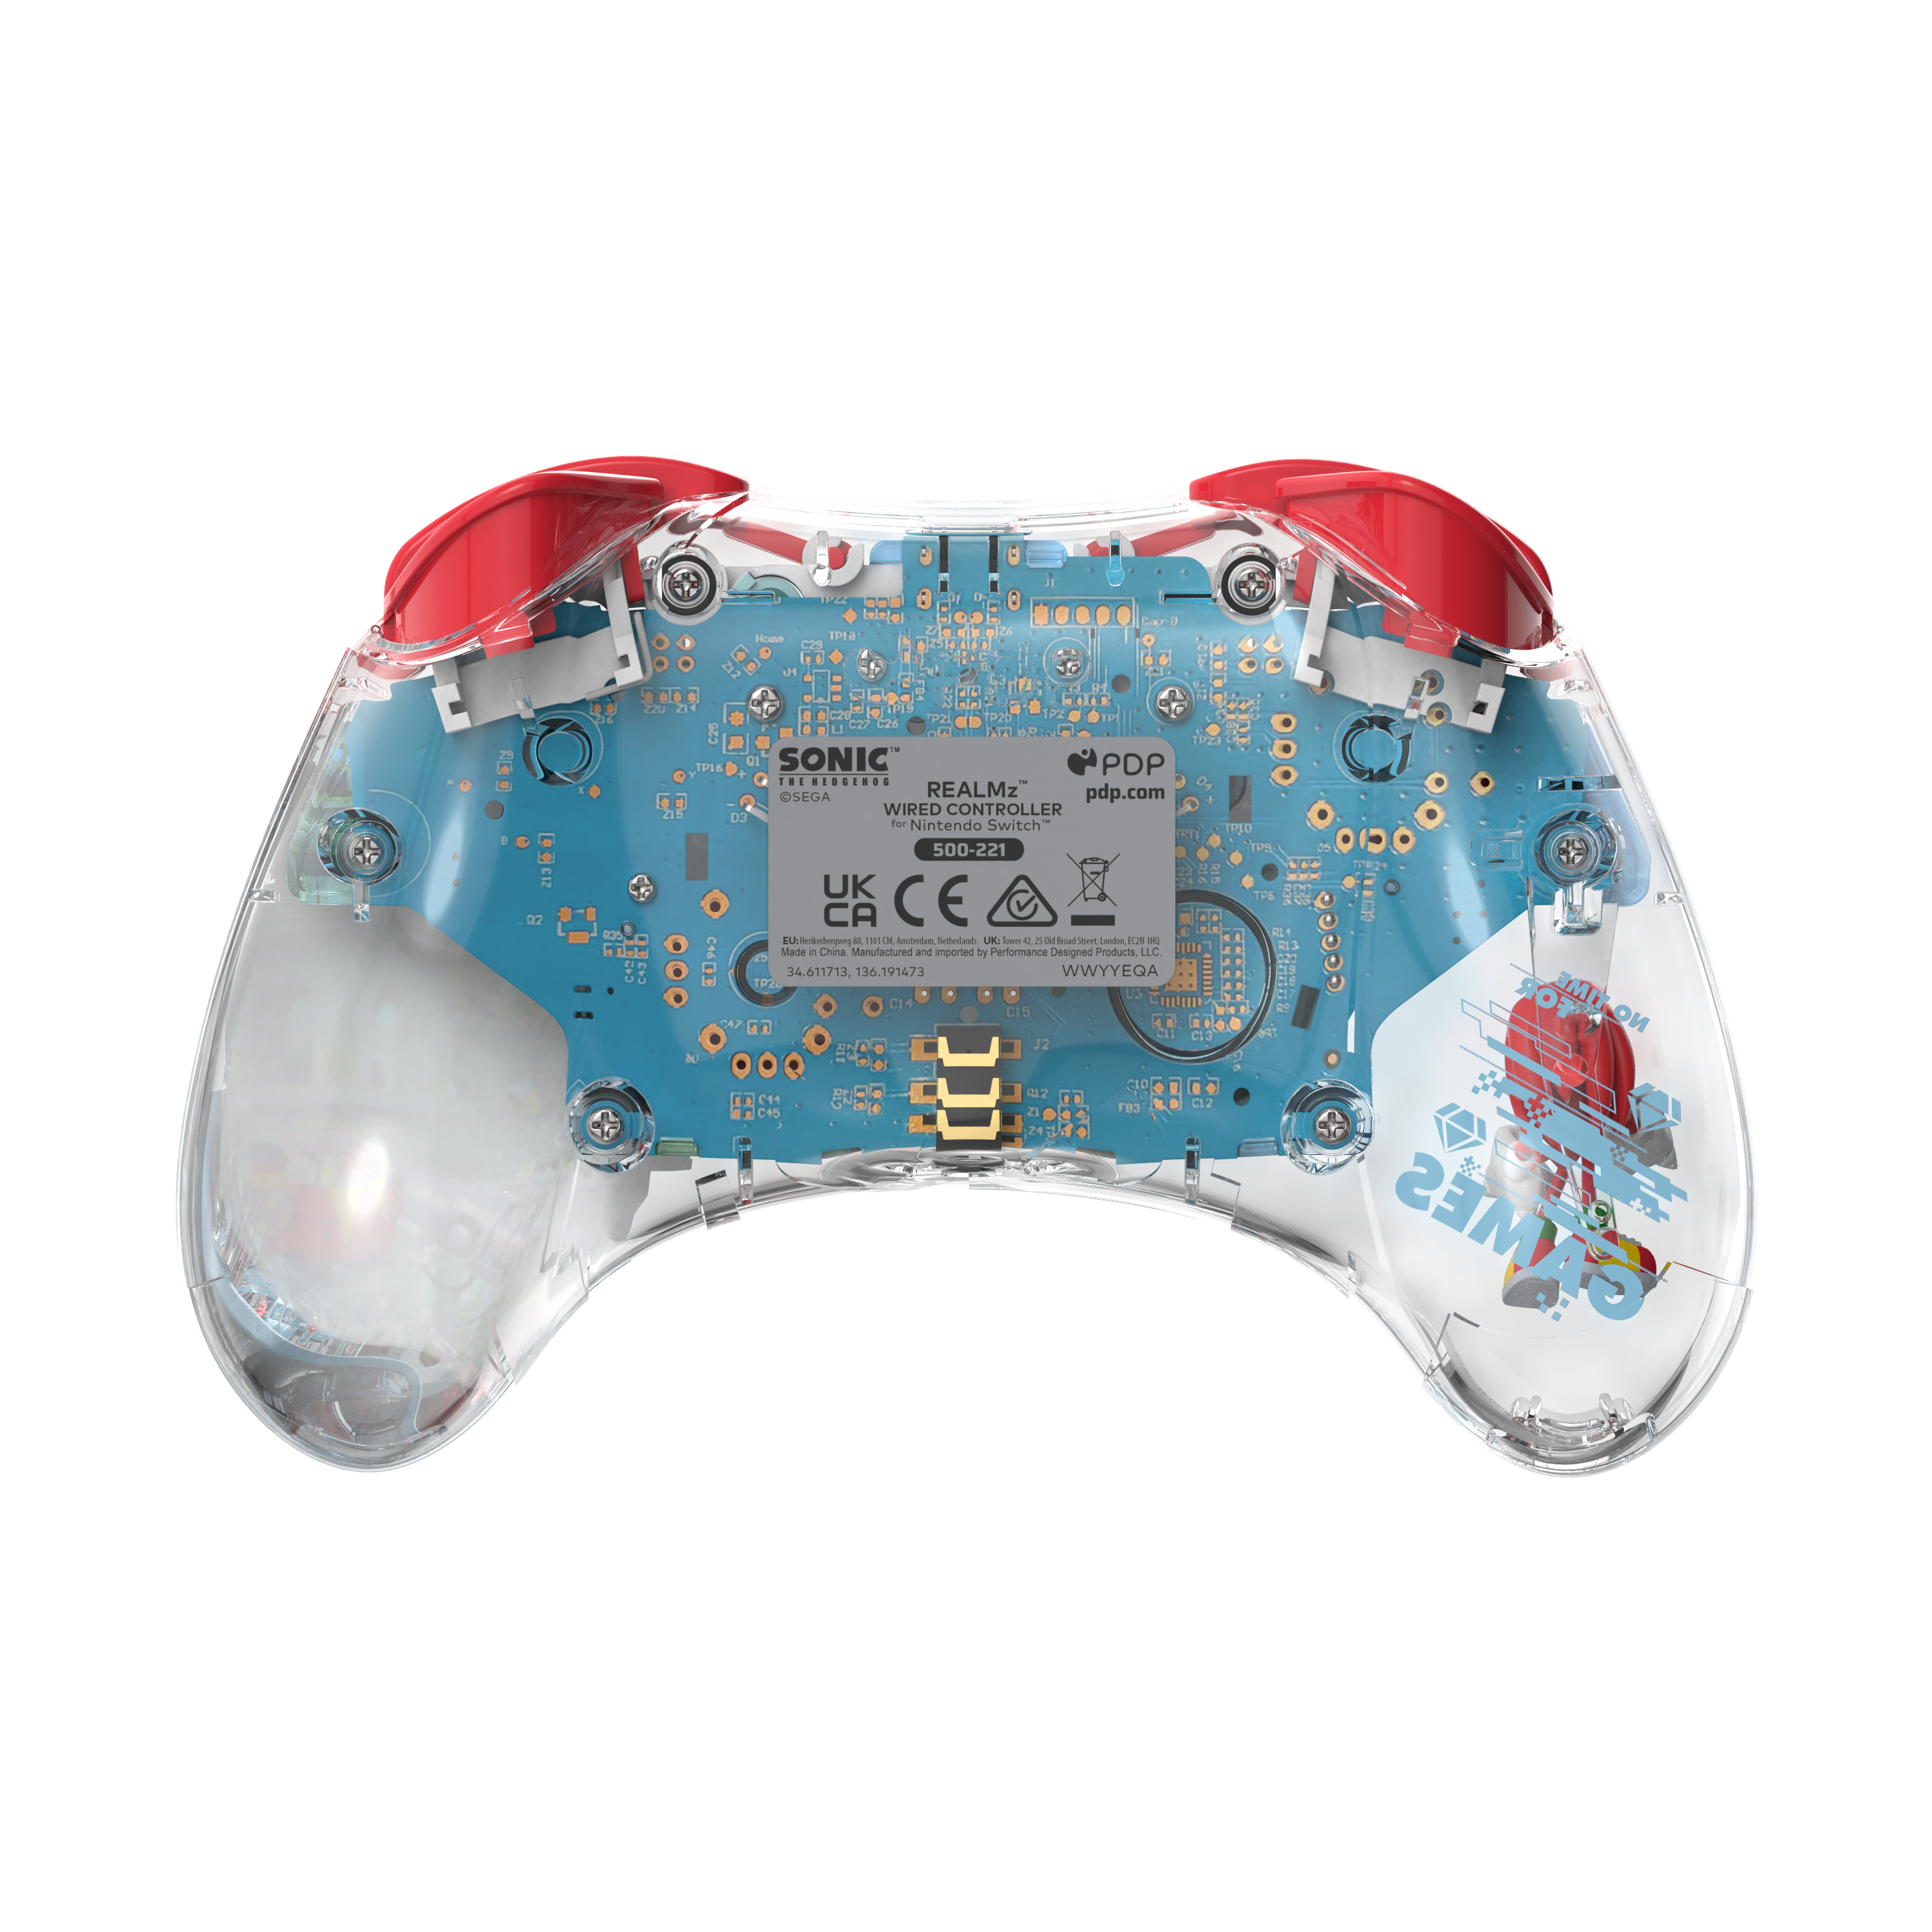 PDP Realmz Sonic the Hedgehog Wired Controller for Nintendo Switch -  Knuckles